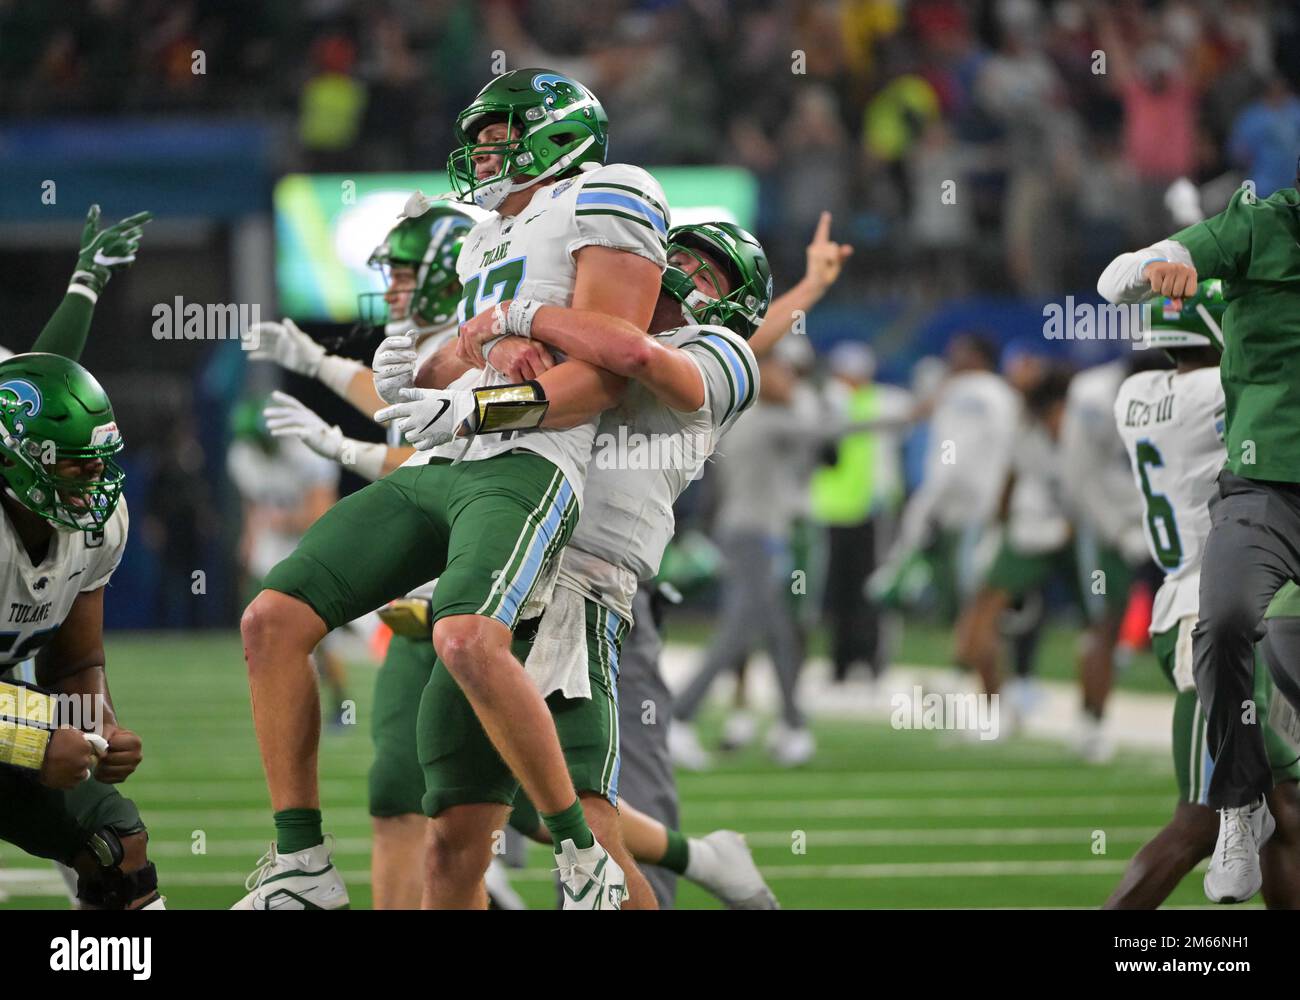 Arlington, Texas, USA. 2nd Jan, 2023. Tulane Green Wave quarterback Michael Pratt (7) and Tulane Green Wave tight end Alex Bauman (87) celebrate a touchdown after review during the 2nd half of the NCAA Football game between the Tulane Green Wave and the USC Trojans at AT&T Stadium in Arlington, Texas. Matthew Lynch/CSM/Alamy Live News Stock Photo